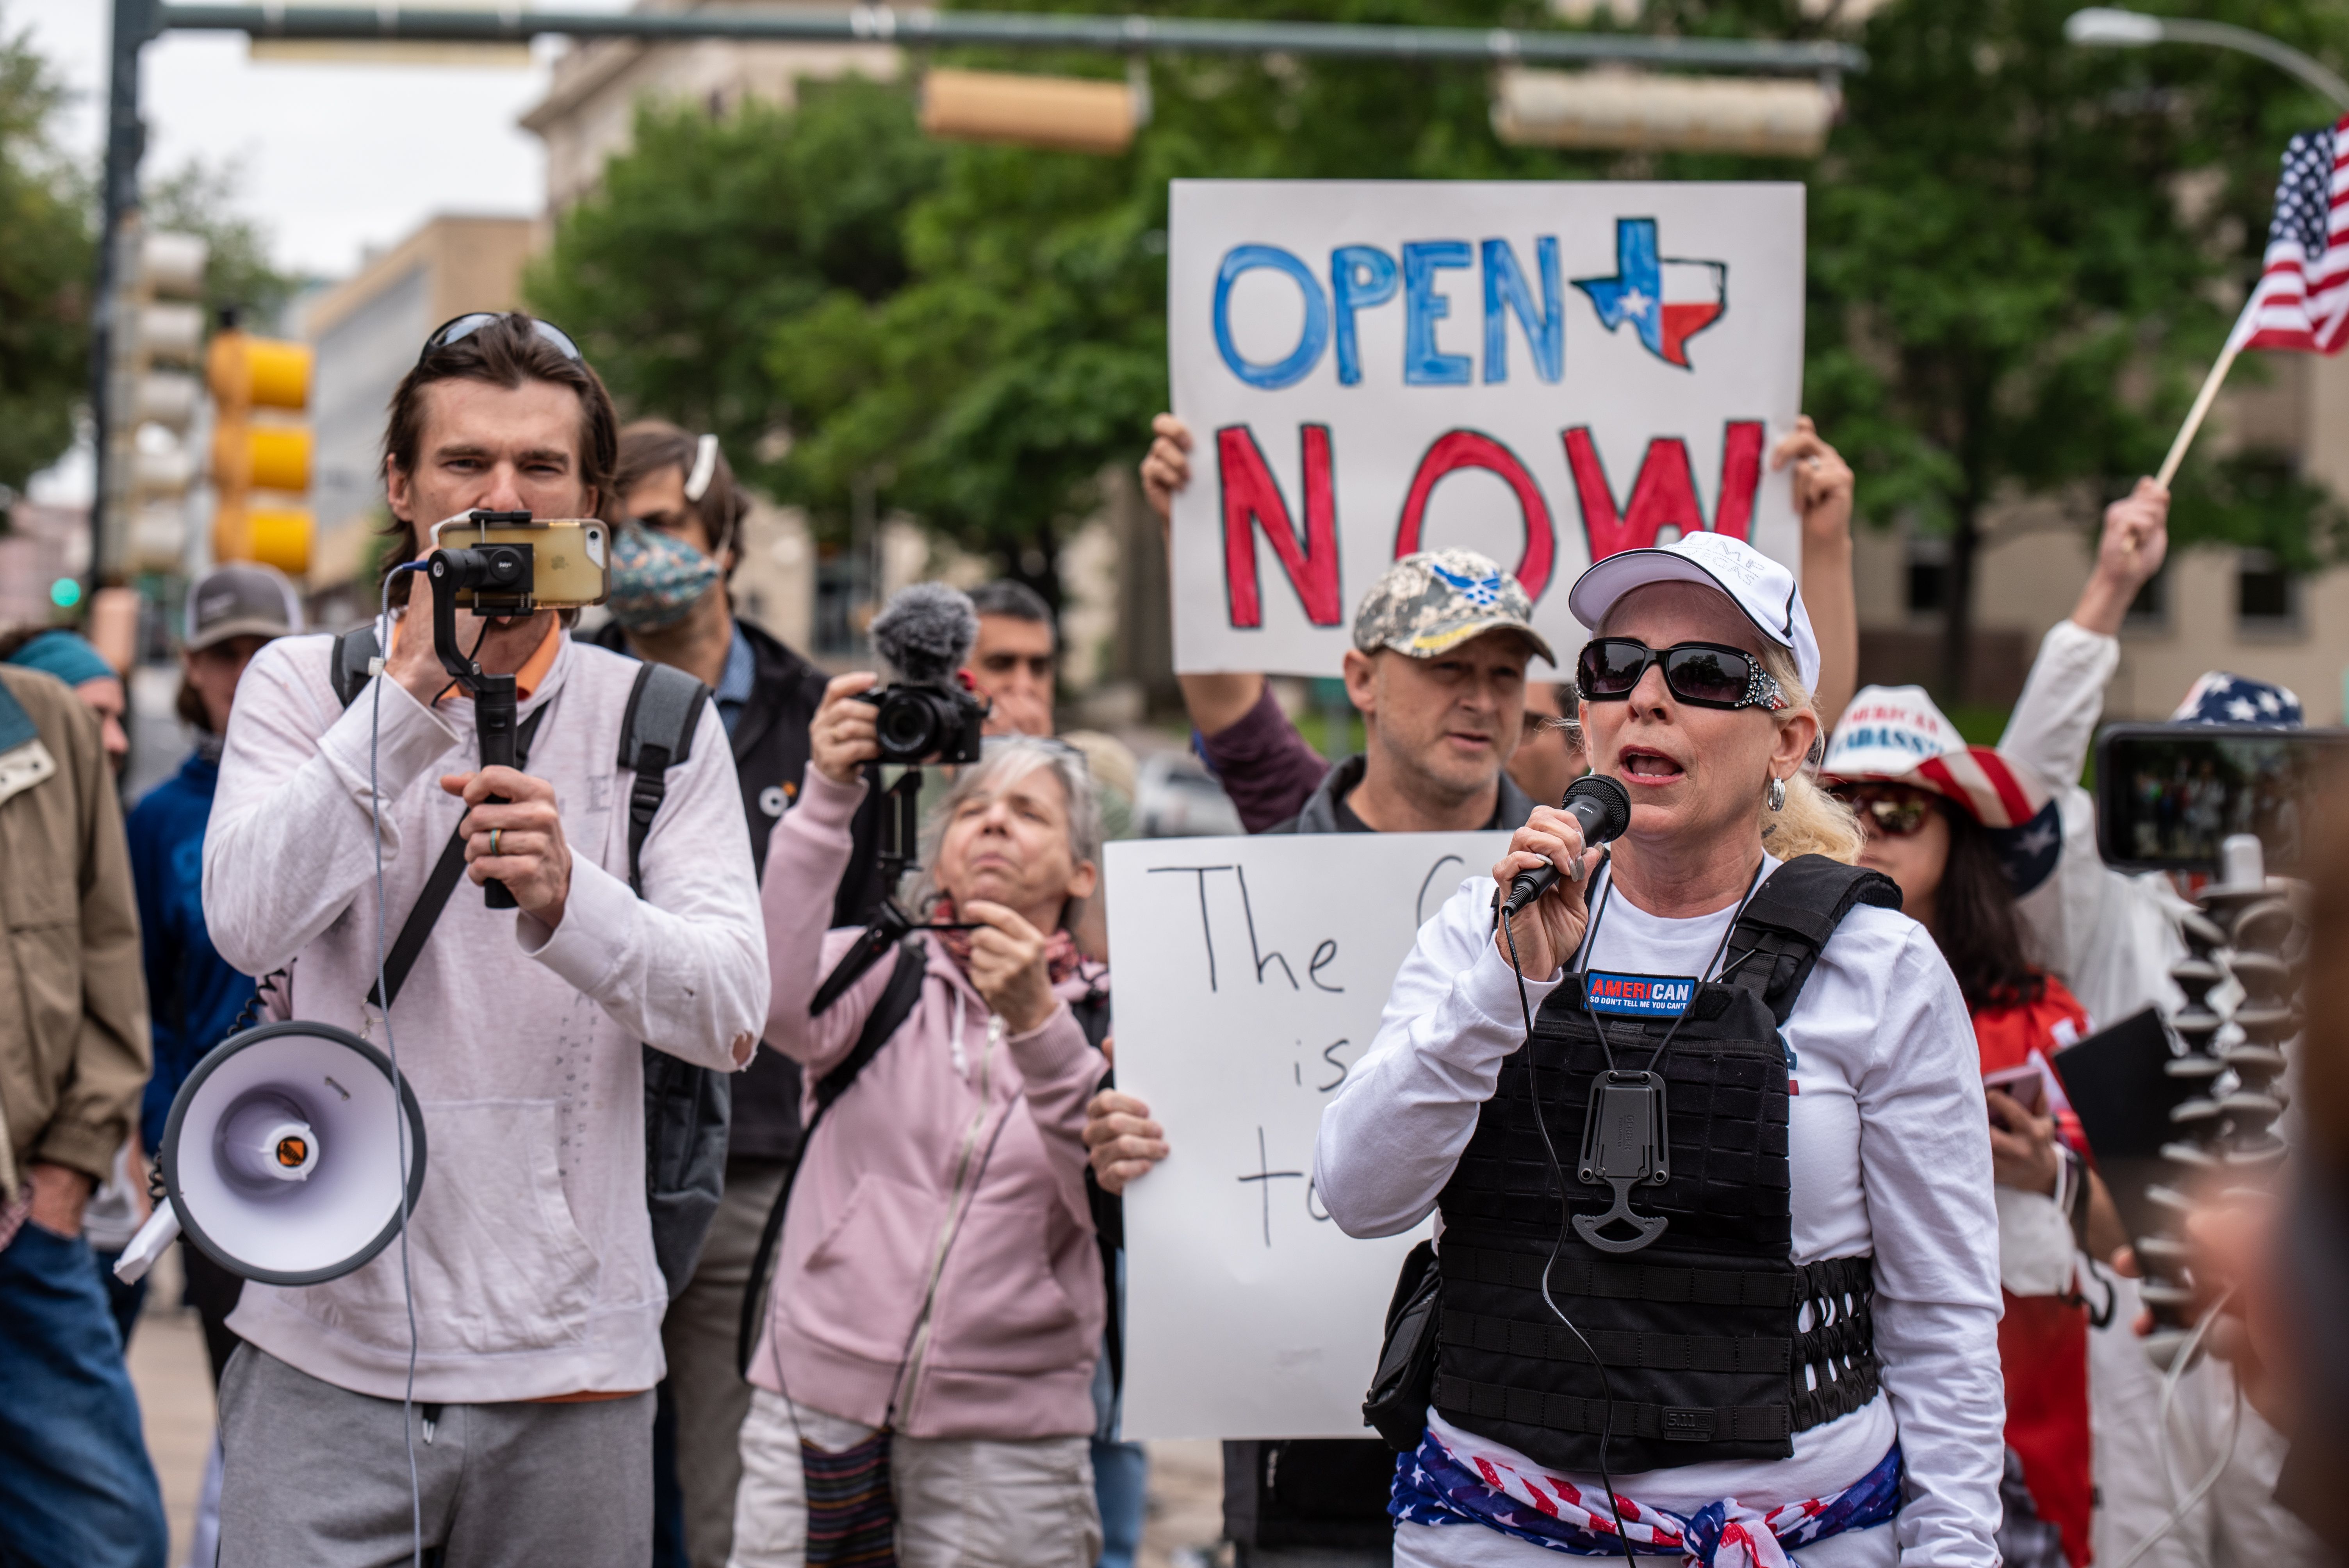 In this image, a woman speaks into a microphone while a sign behind her reads "Open texas now"